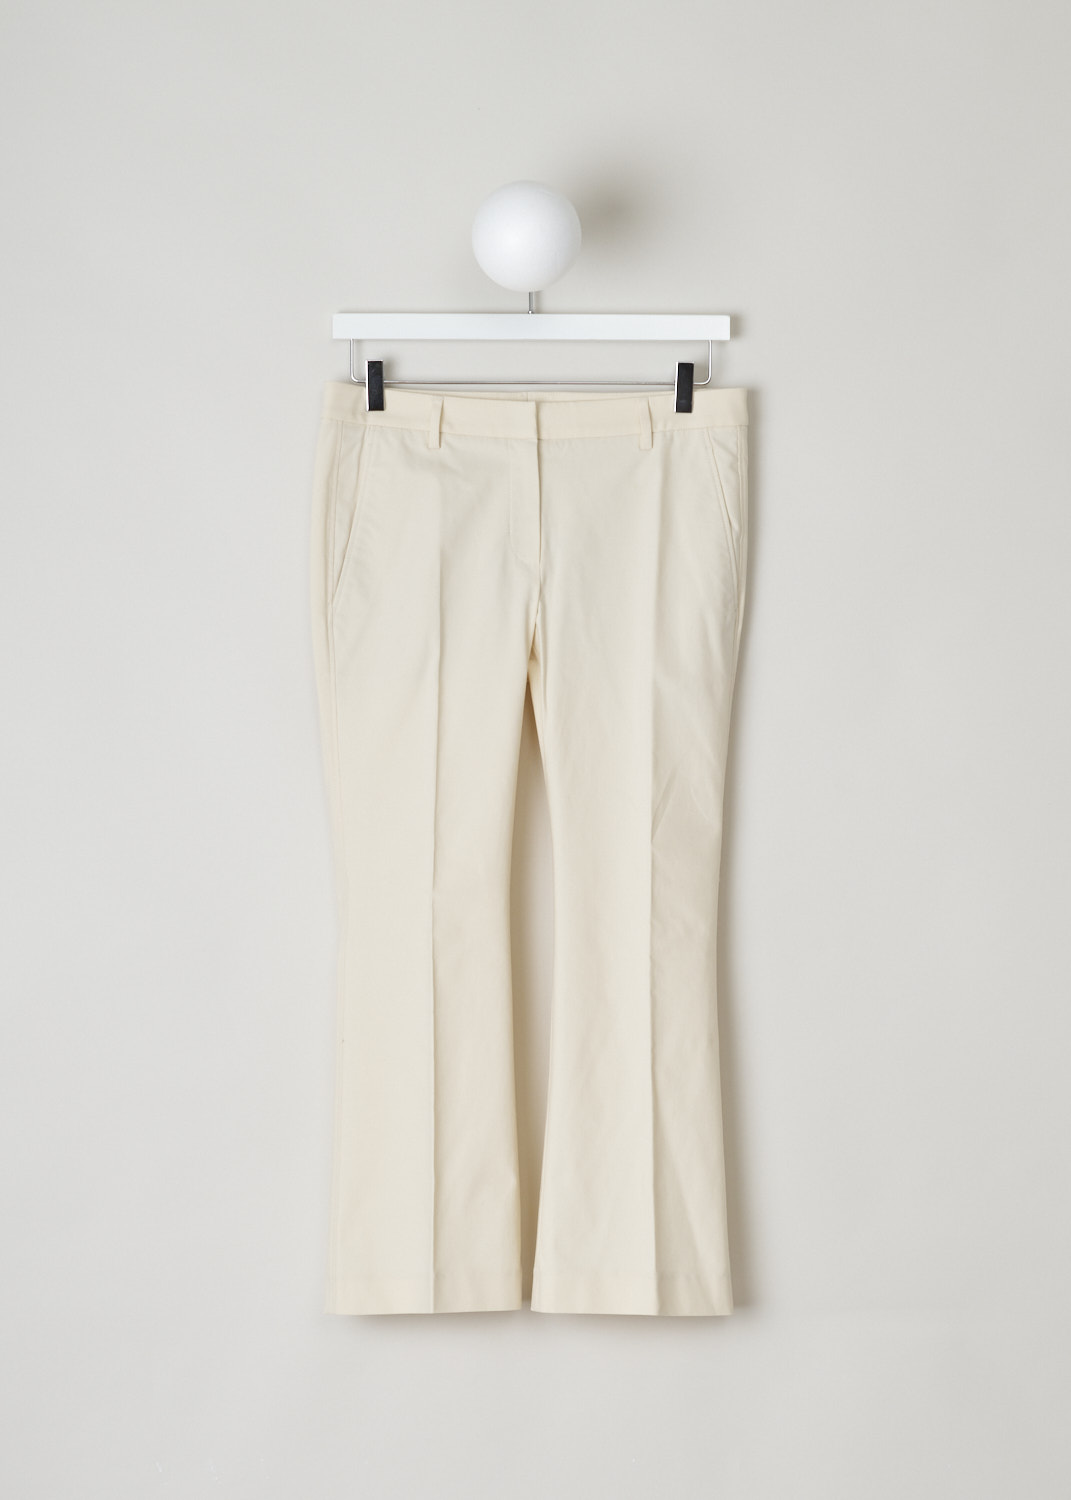 Brunello Cucinelli, Cream coloured boot-cut chino, M0F70P1951_C7070, beige, front, Made in the flat front model, with boot-cut legs. Furthermore, this model has two forward slanted pockets on the front and two jetted pockets on the back.